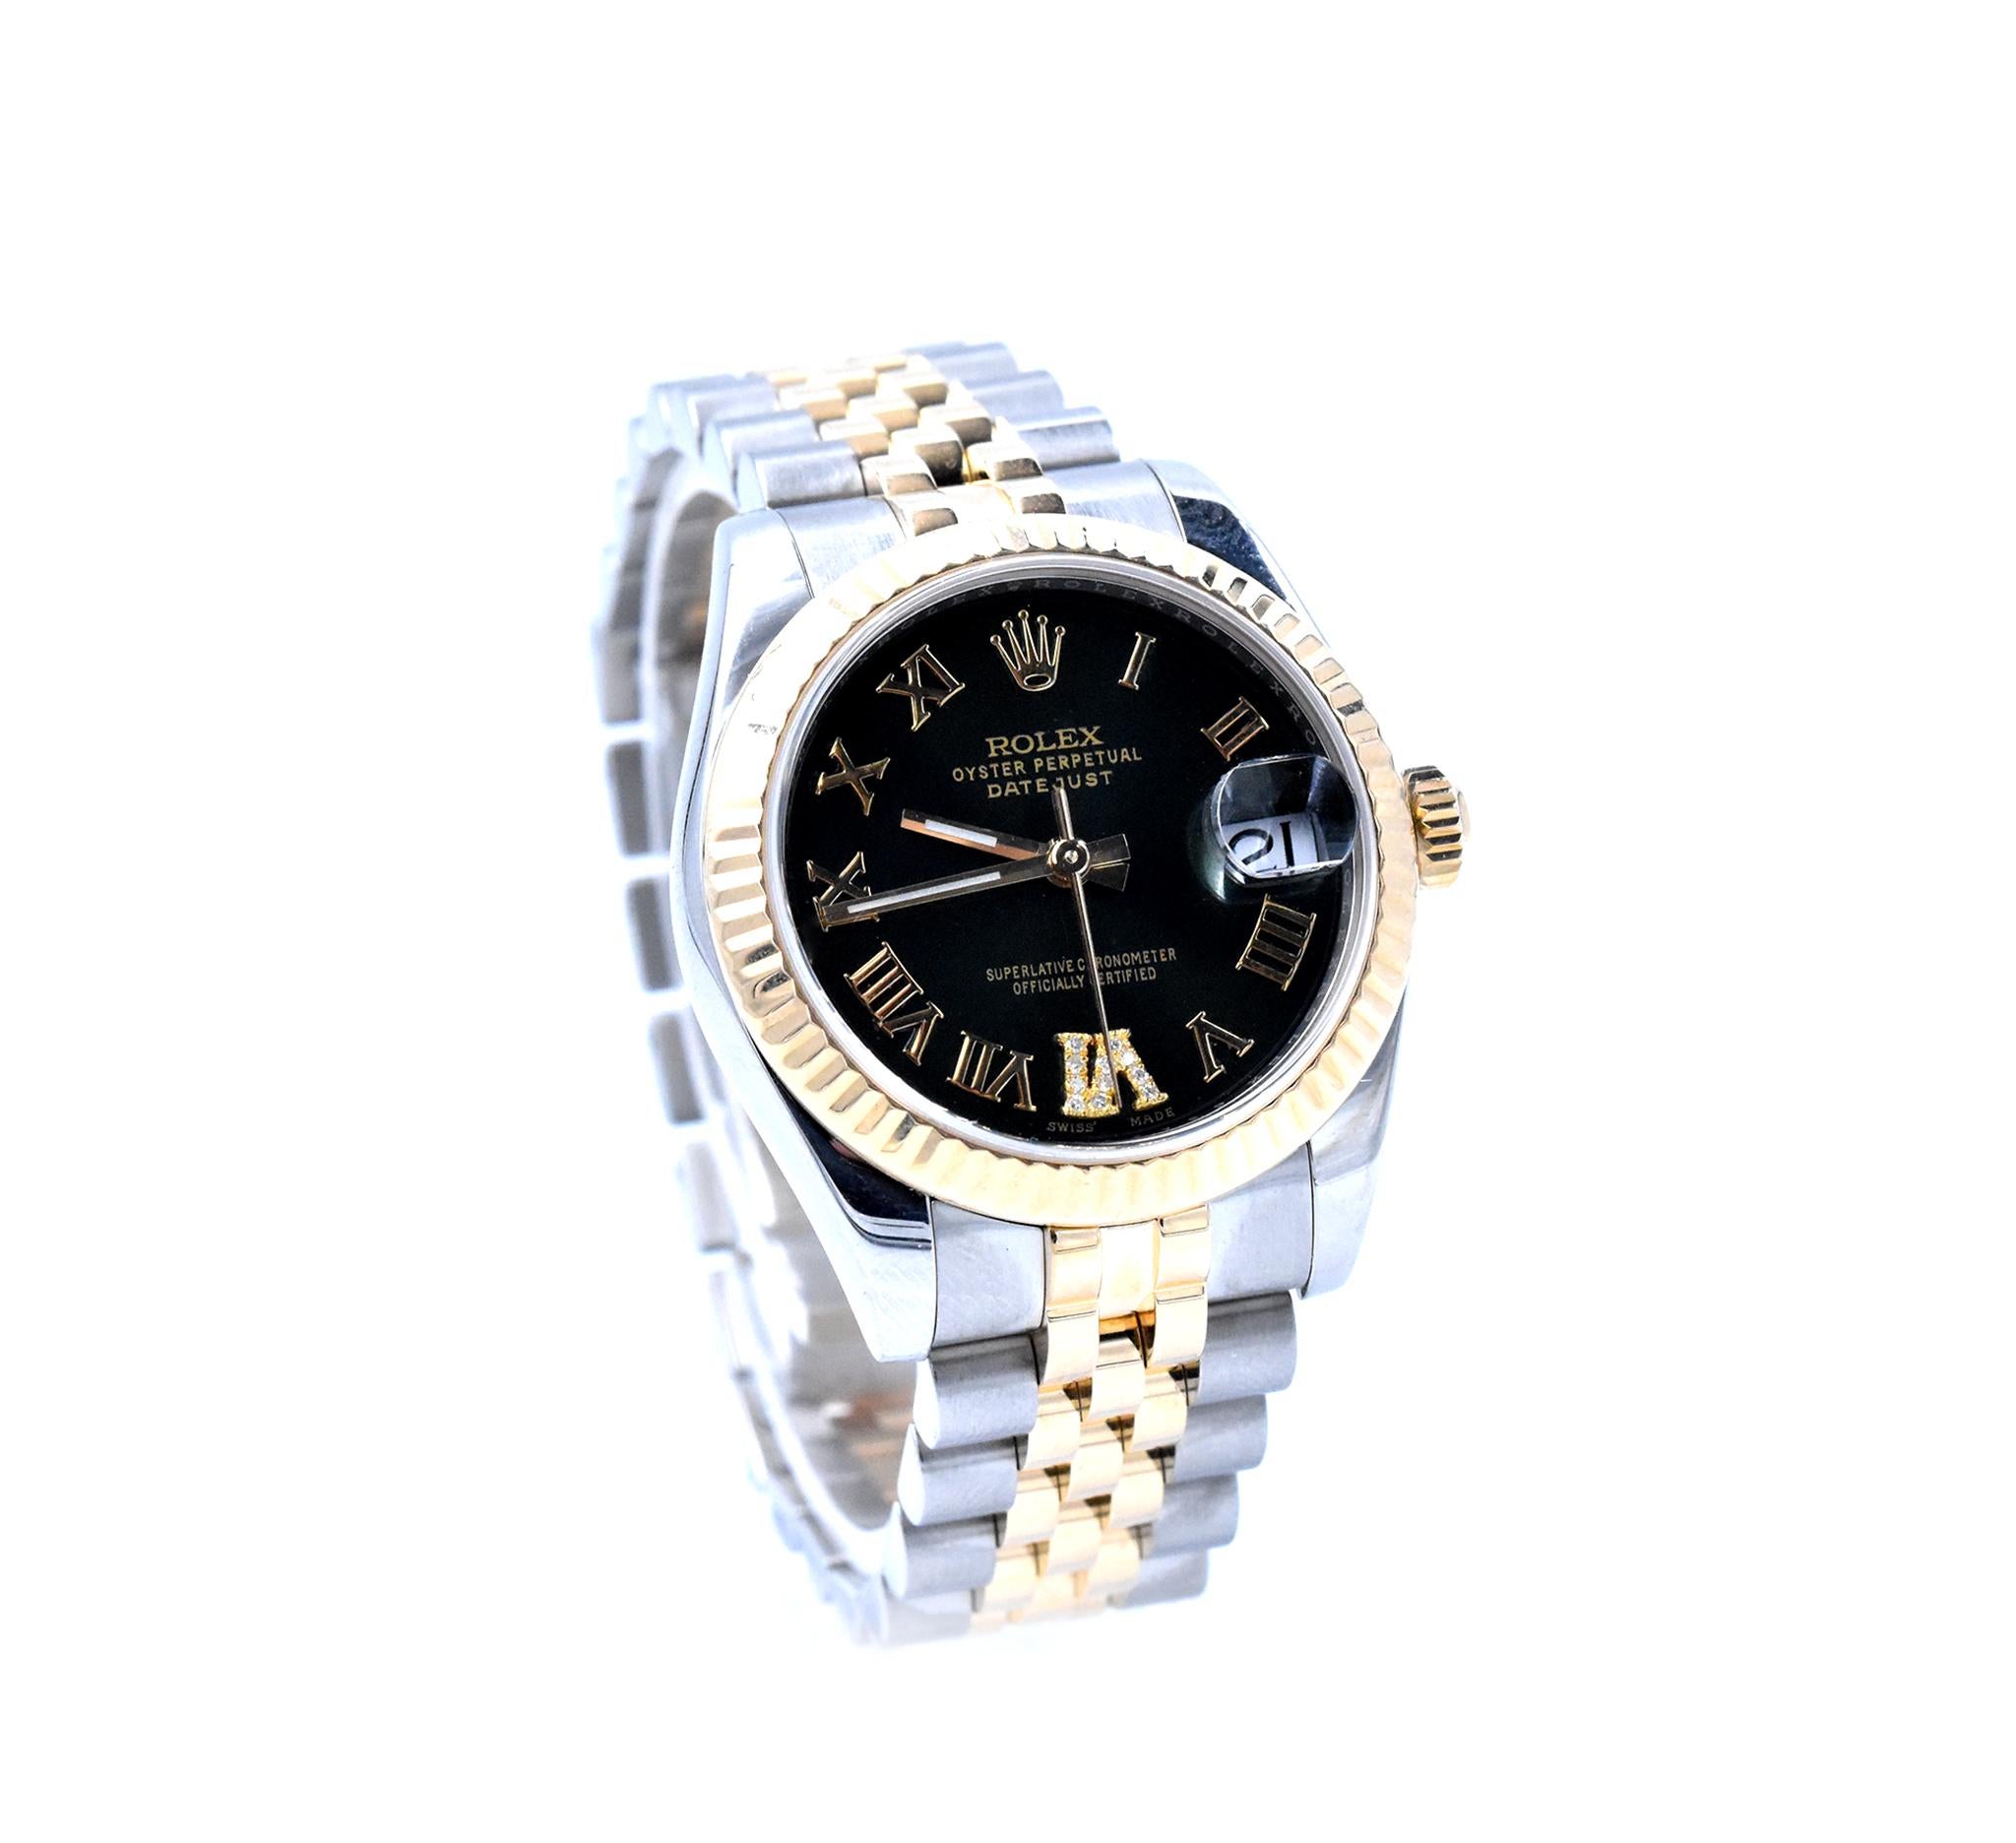 Movement: automatic movement
Function: hours, minutes, seconds, date
Case: round 31mm stainless steel case with fluted 18k yellow gold bezel, inner reflector ring engraved with serial number, sapphire crystal, screw-down crown, water proof to 100